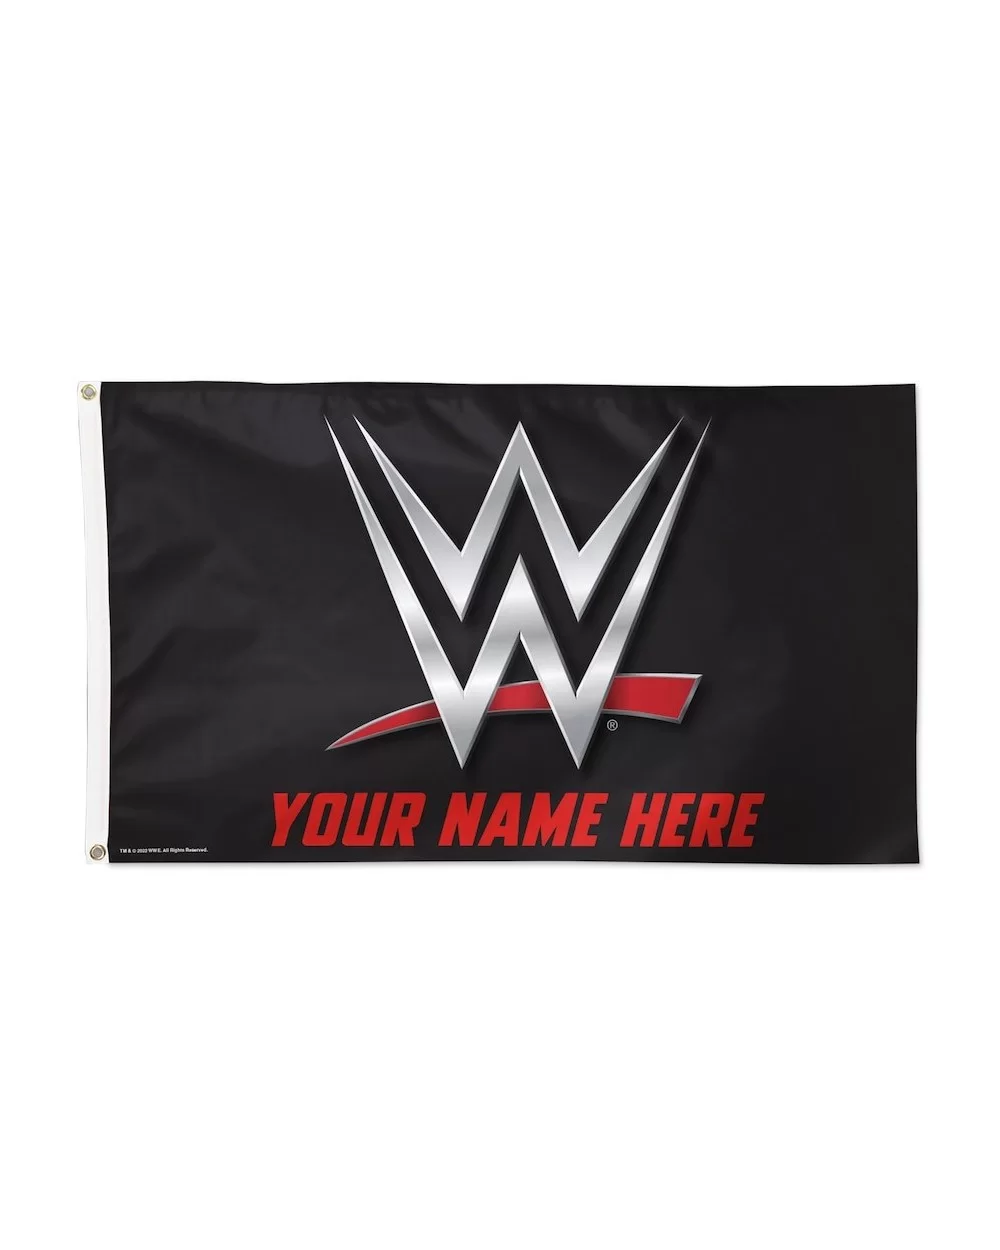 WinCraft WWE 3' x 5' One-Sided Deluxe Personalized Flag $12.00 Home & Office